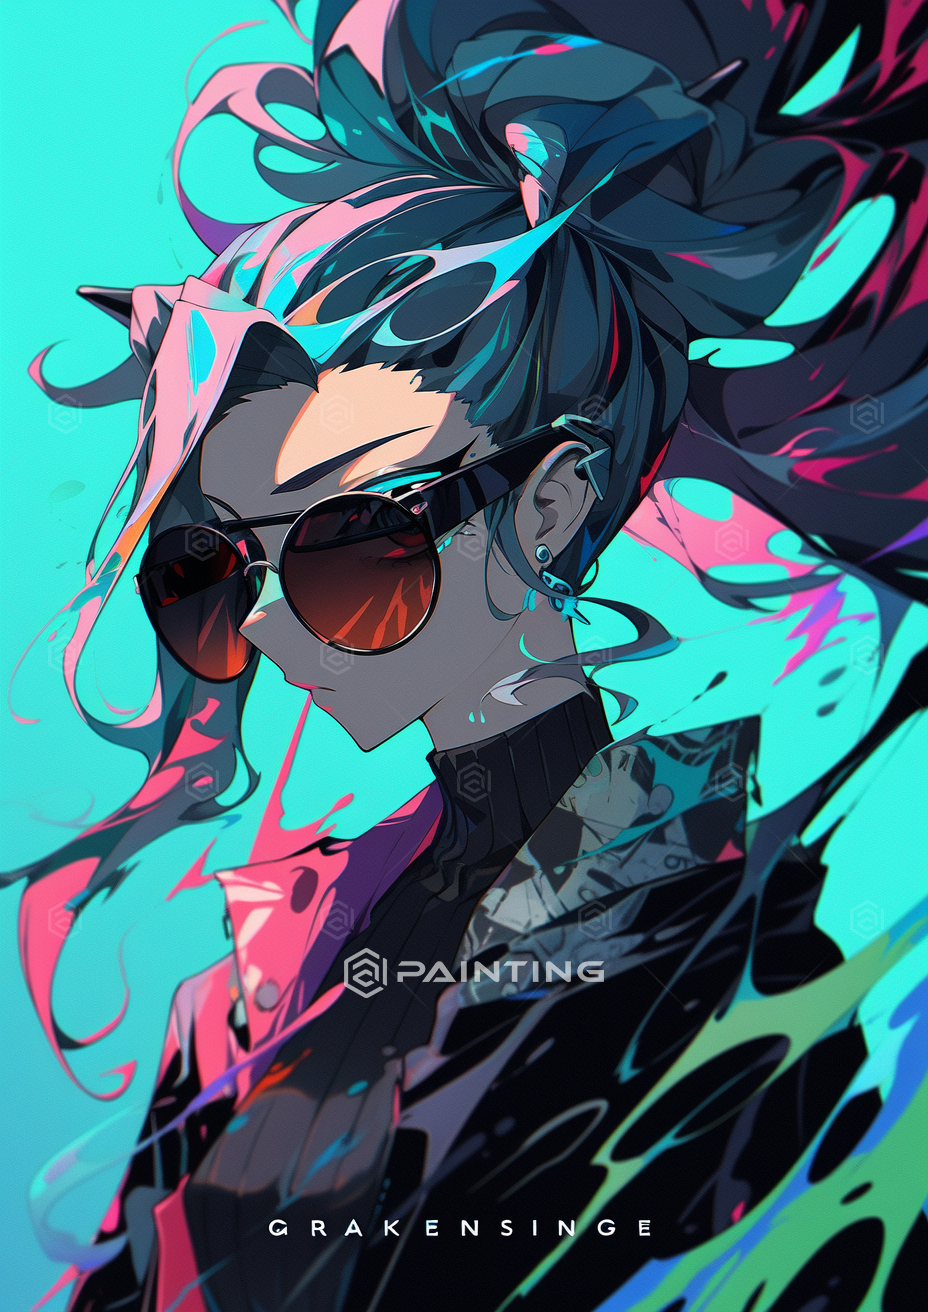 bright_anime_background_with_a_girl_wearing_sunglasses_in_t_e5e266e9-03d6-4d2d-bff9-74f55d01e58f.png